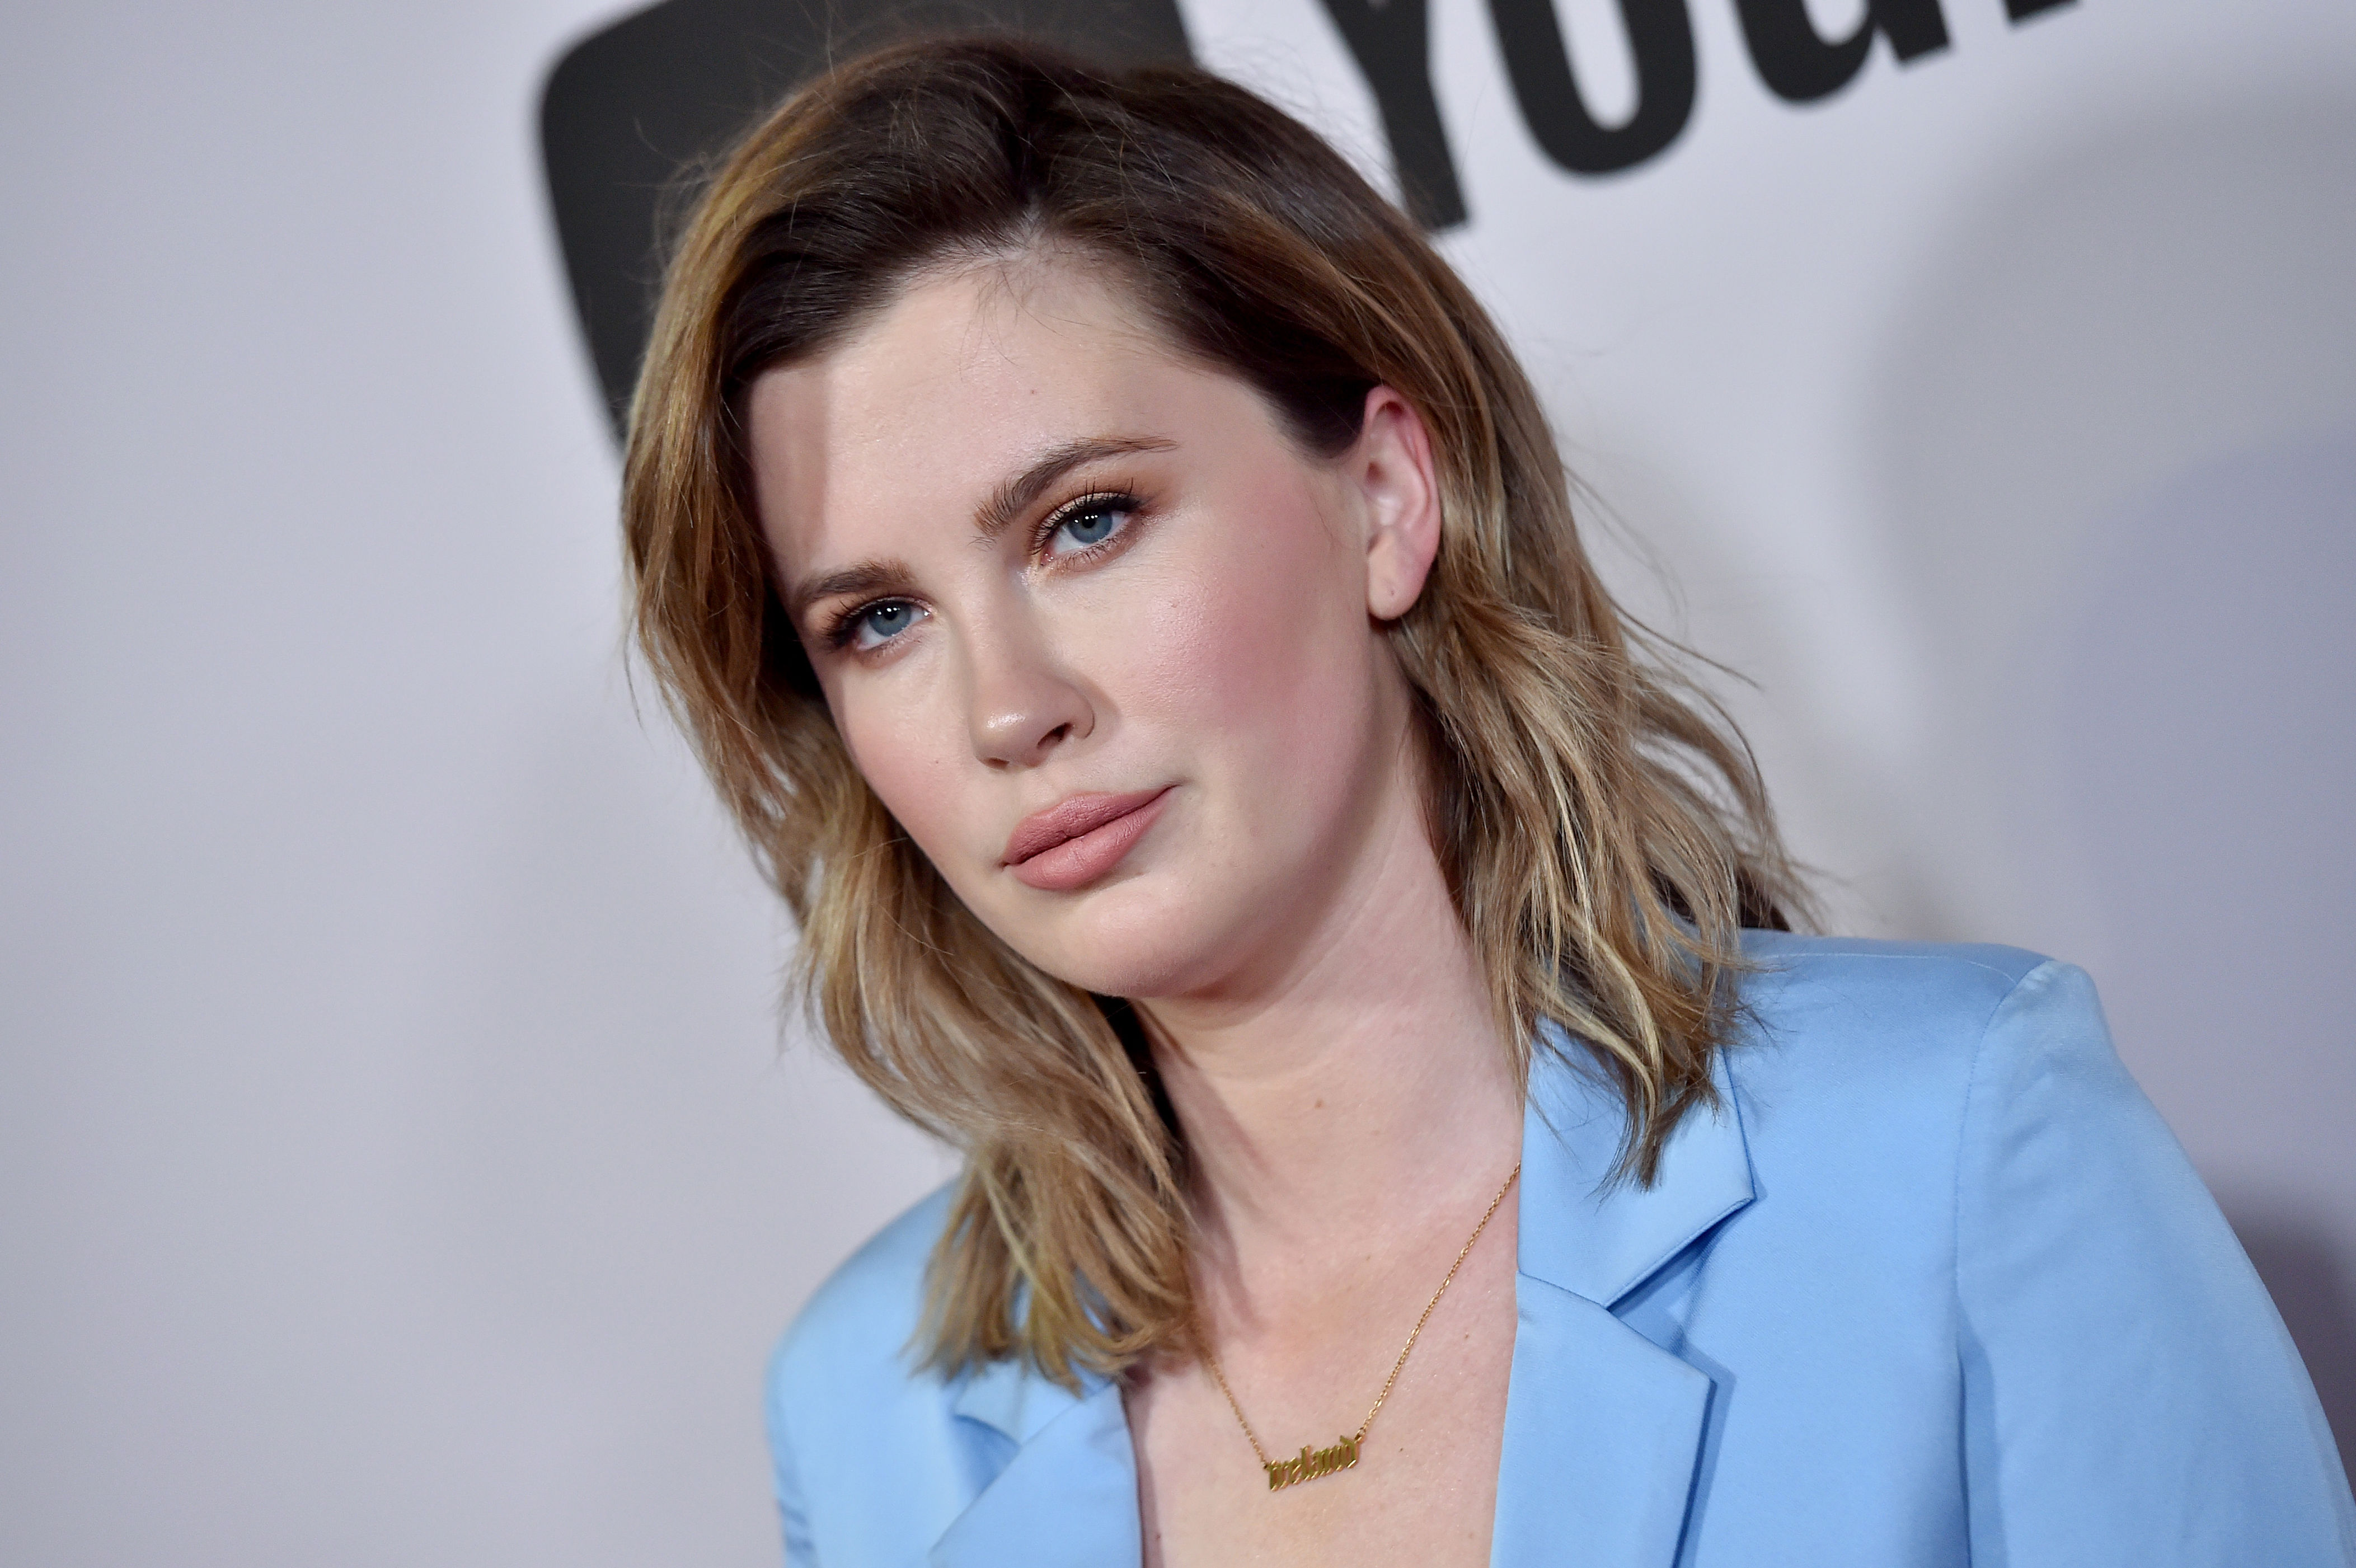 <p>Model Ireland Baldwin -- who's the daughter of Oscar winner Kim Basinger and Emmy winner Alec Baldwin -- is seen here in 2020. In April 2022, the beauty took to social media to reveal that she, alongside cousin Alaia Baldwin (the sister of model Hailey Bieber), underwent a FaceTite procedure that's been characterized as a mini facelift. Ireland explained in a TikTok <a href="https://www.instagram.com/p/CcQikMspFWw/">video</a> that she wanted to be transparent and share with her fans that she'd had something done -- the first time she's ever had a plastic surgery procedure. </p>